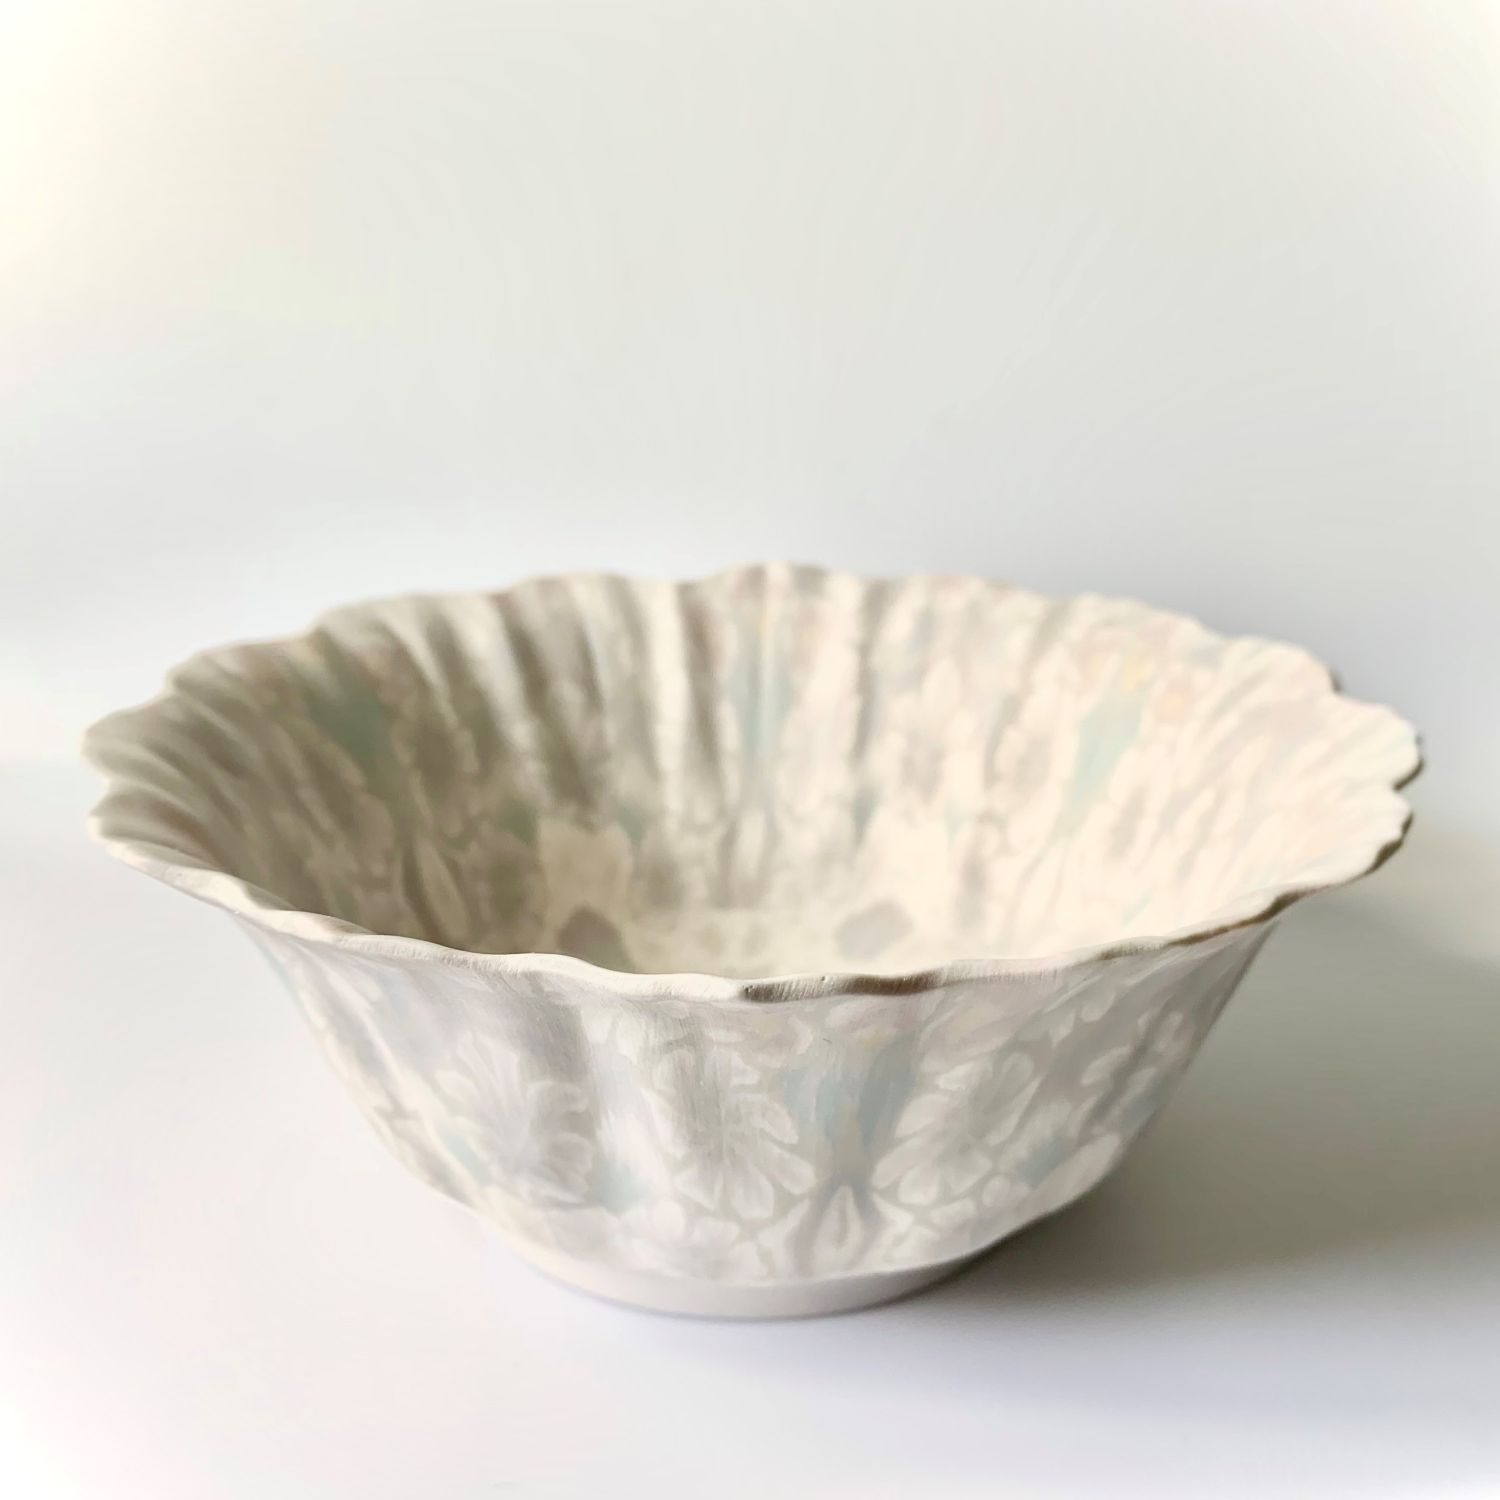 Eiko Maeda: Flat Bottom Bowl in Blue, Pink and Grey Product Image 1 of 3